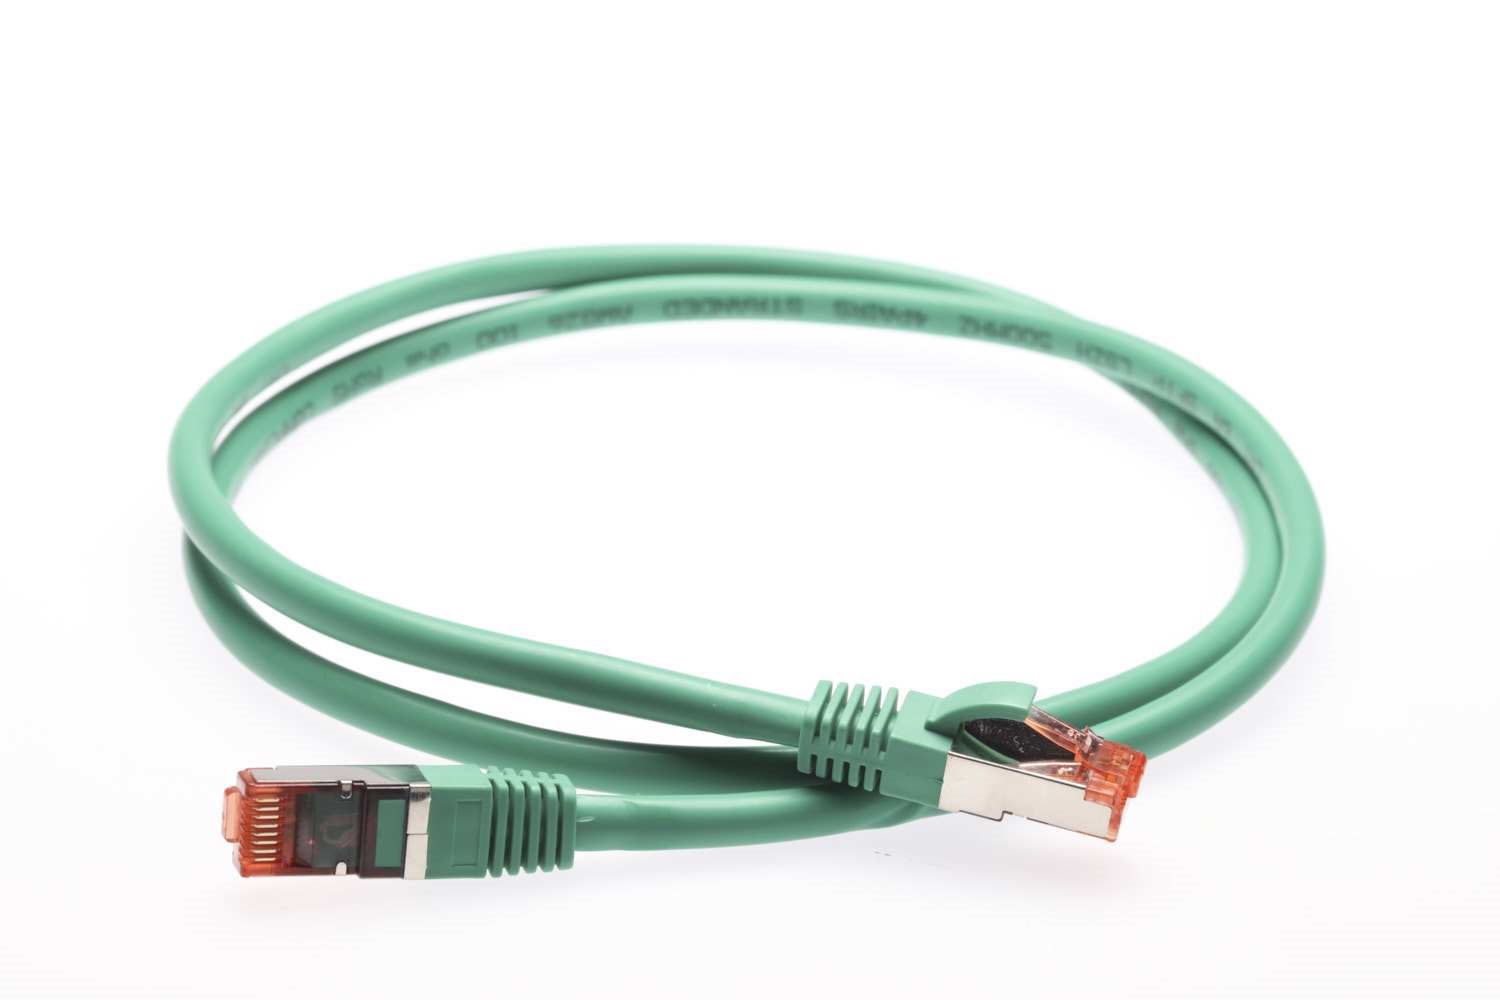 4Cabling 0.5M Cat 6A S/FTP LSZH Ethernet Network Cable. Green